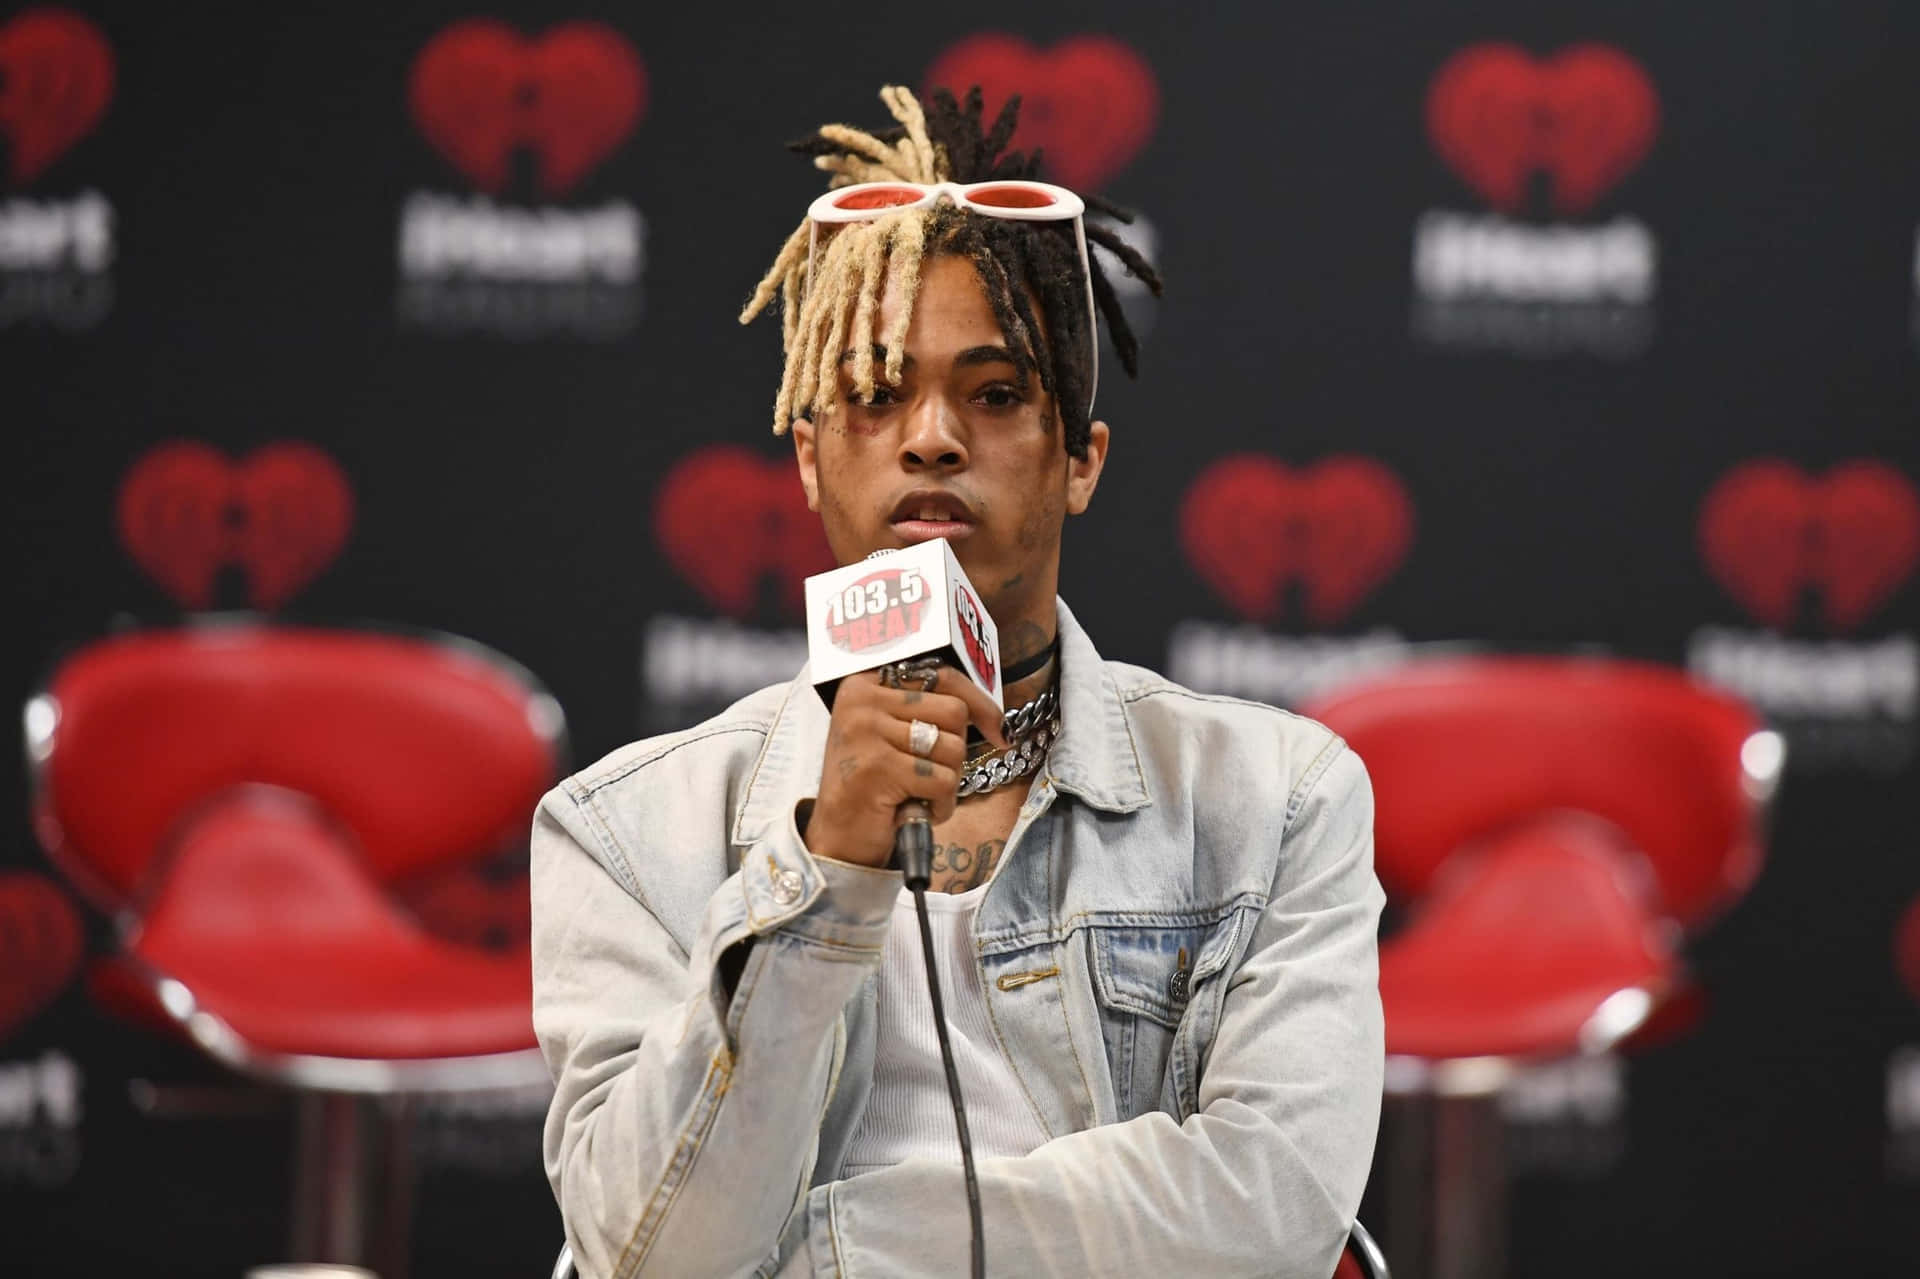 "Remembering XXXTentacion and his powerful music"